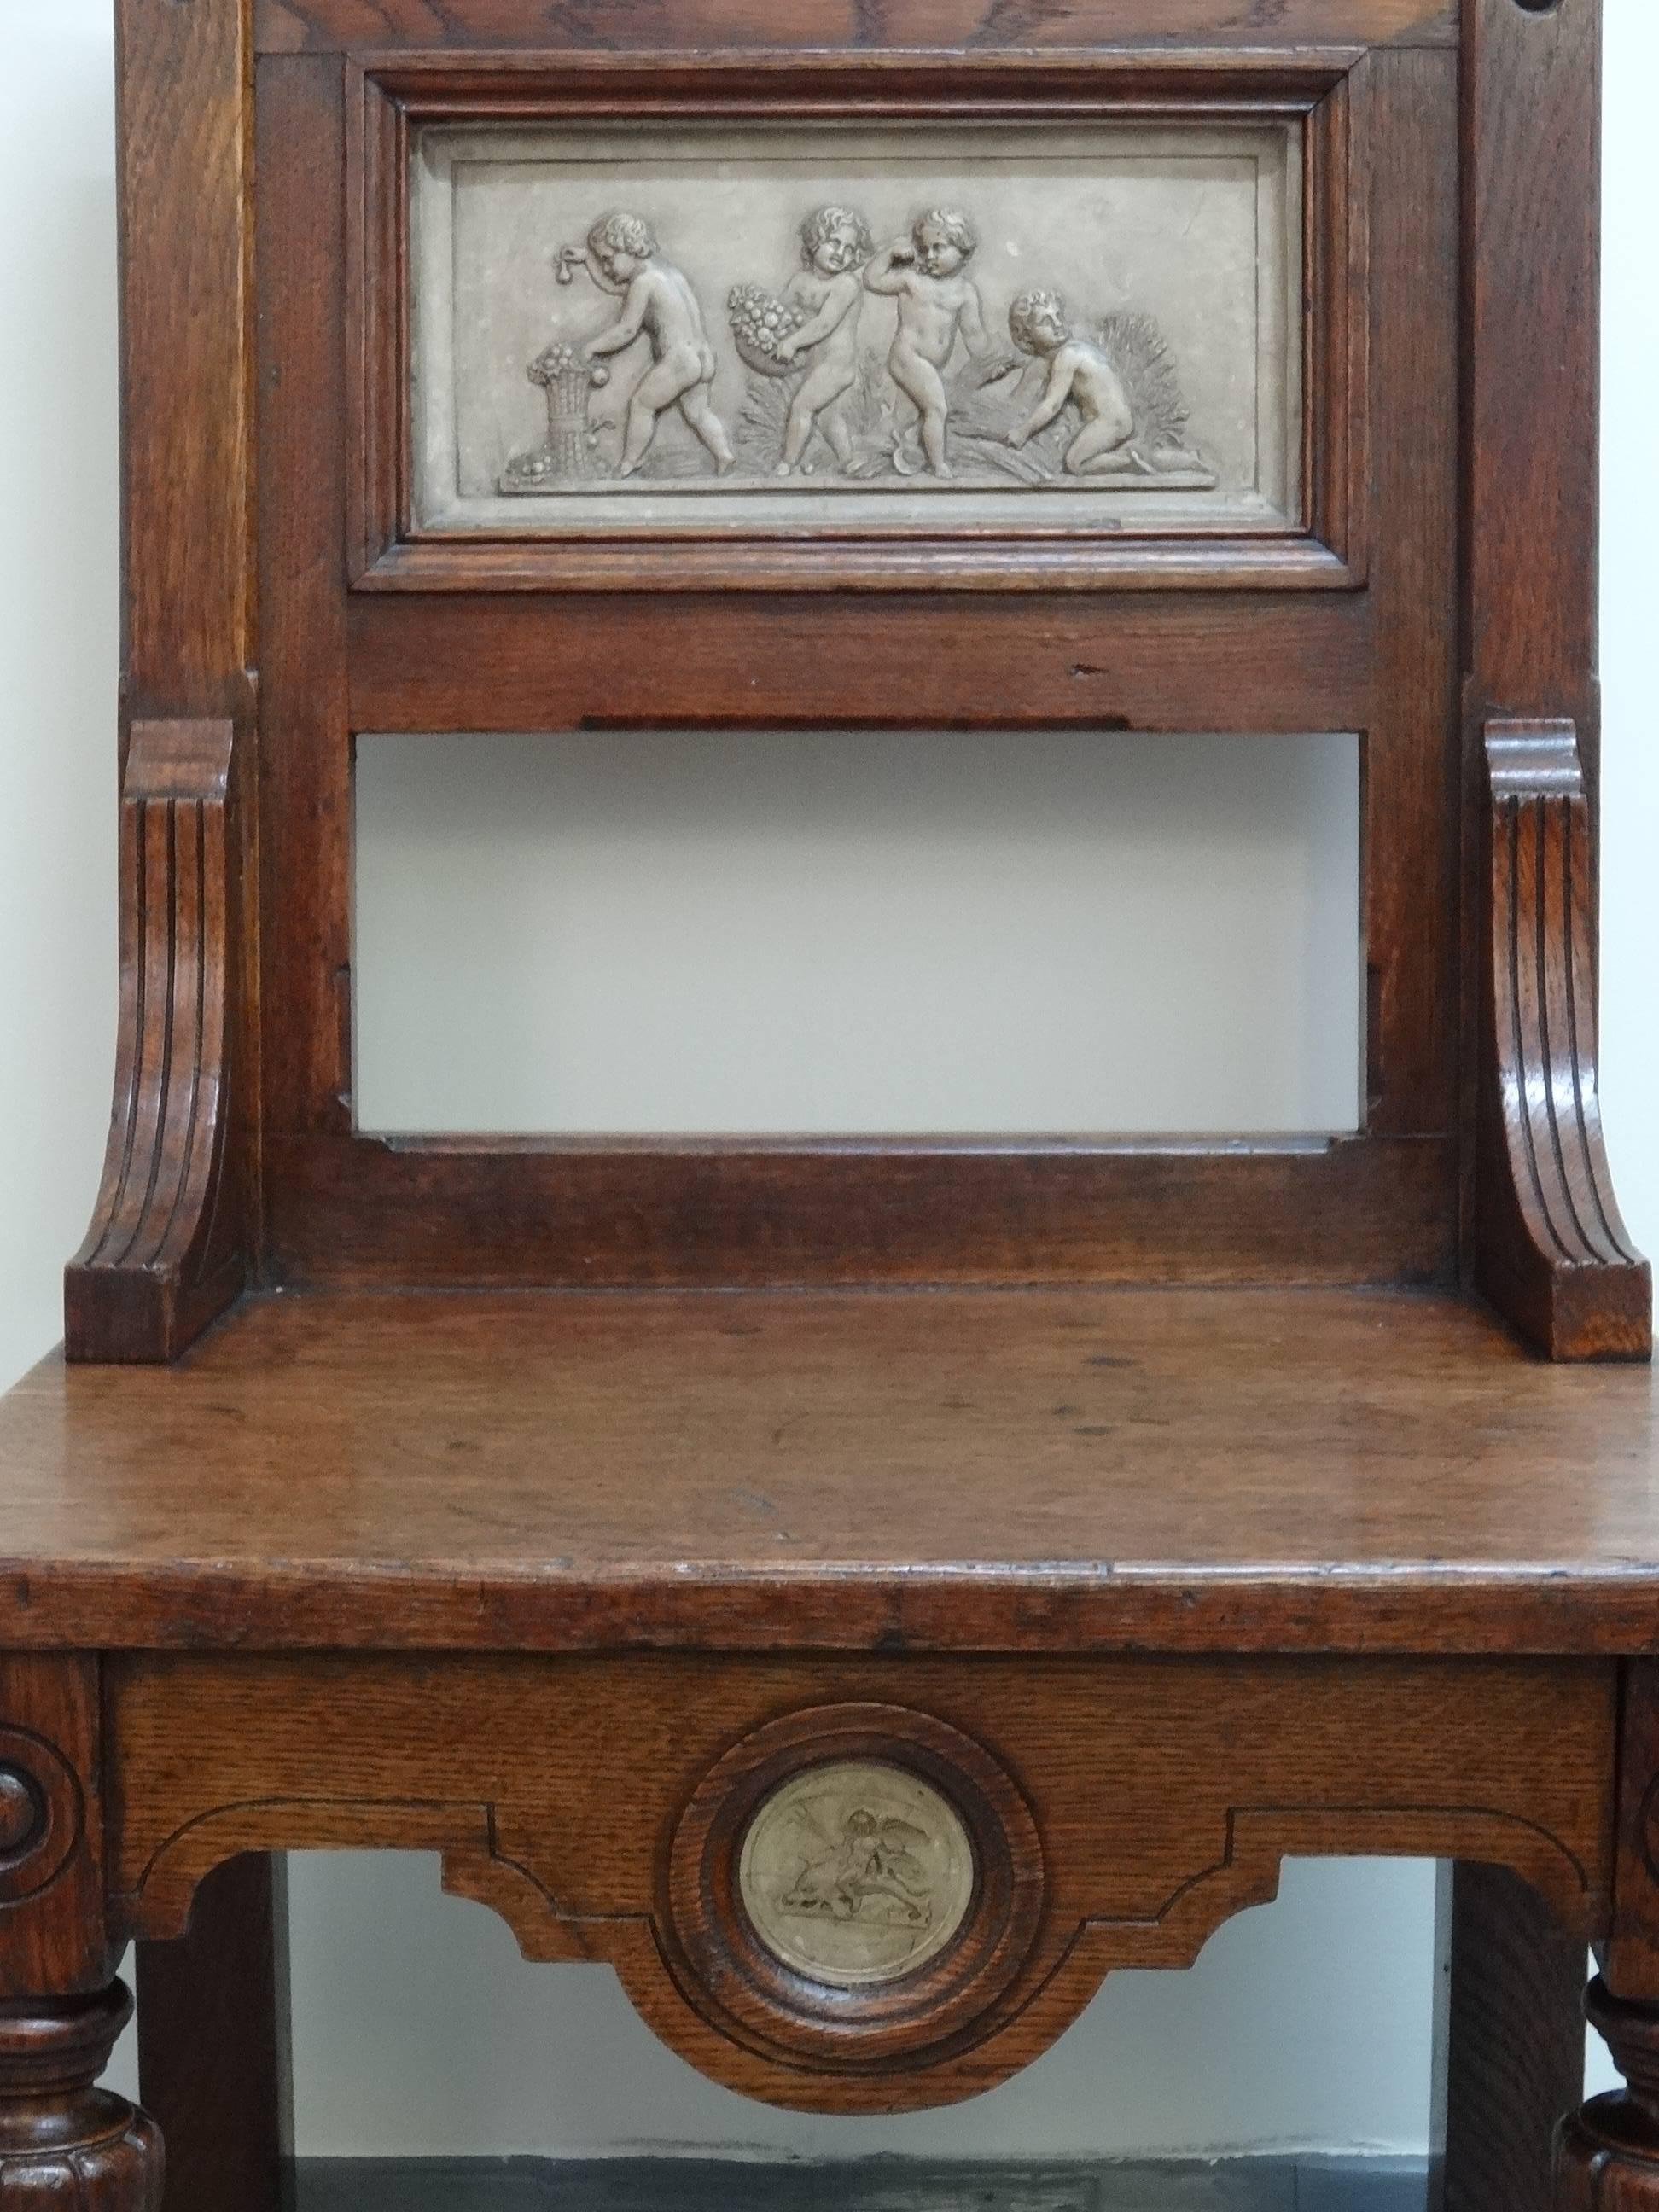 Arts & Crafts late Victorian period oak hall chair; possibly by Gillows of Lancaster or the firm of Marsh Jones & Cribb. Two plaster/earthenware panels; top one of putti/children playing and lower circular one of winged putti with trident